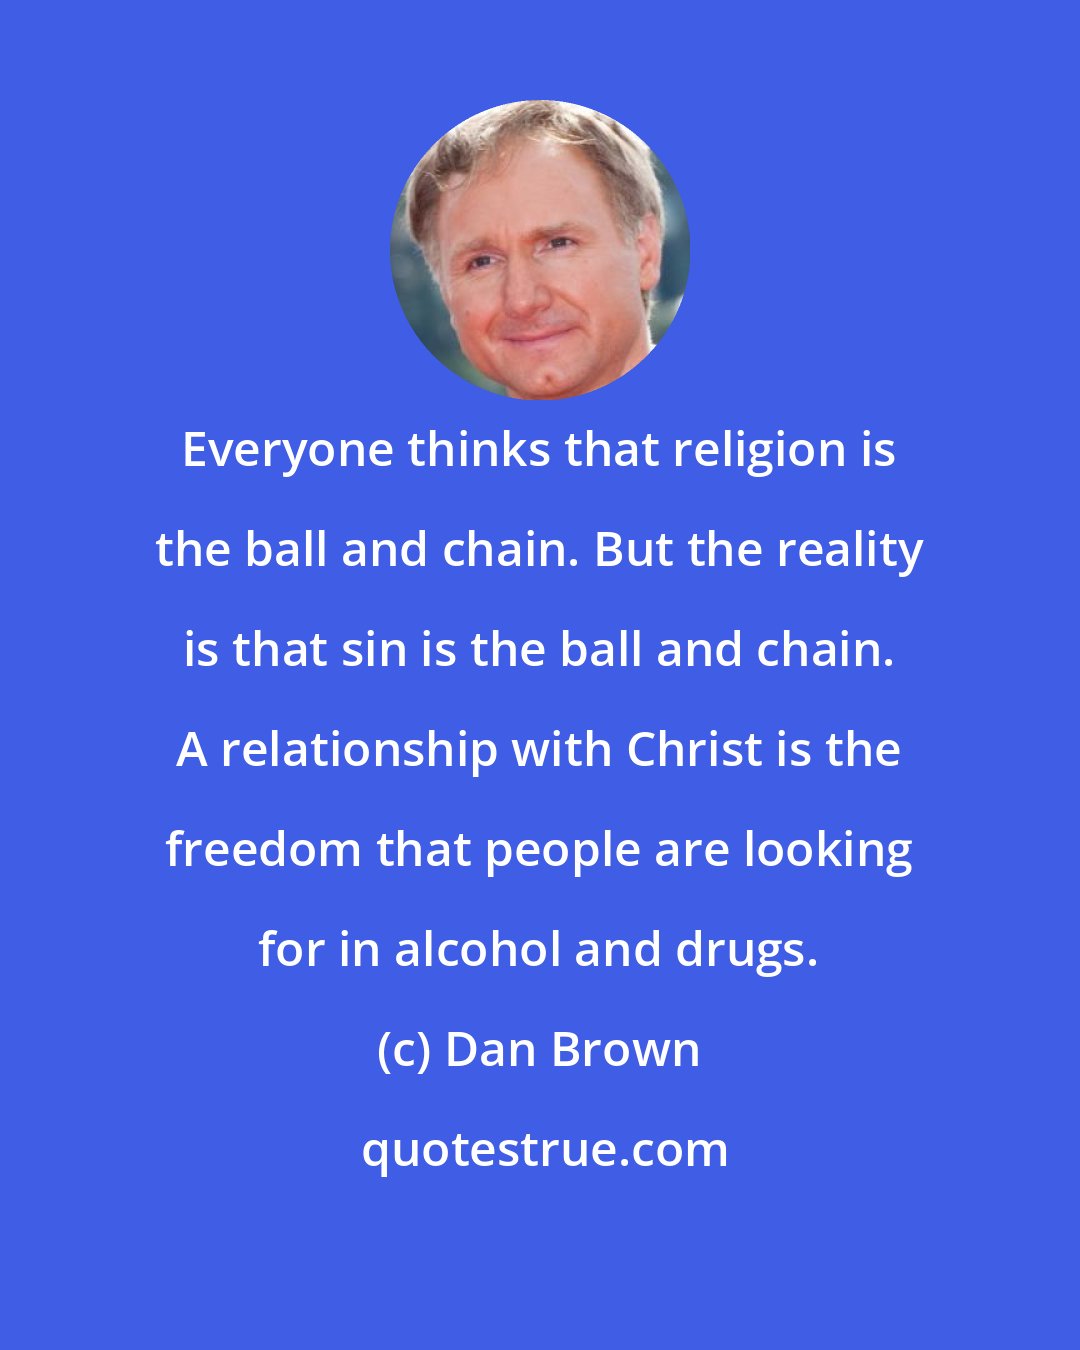 Dan Brown: Everyone thinks that religion is the ball and chain. But the reality is that sin is the ball and chain. A relationship with Christ is the freedom that people are looking for in alcohol and drugs.